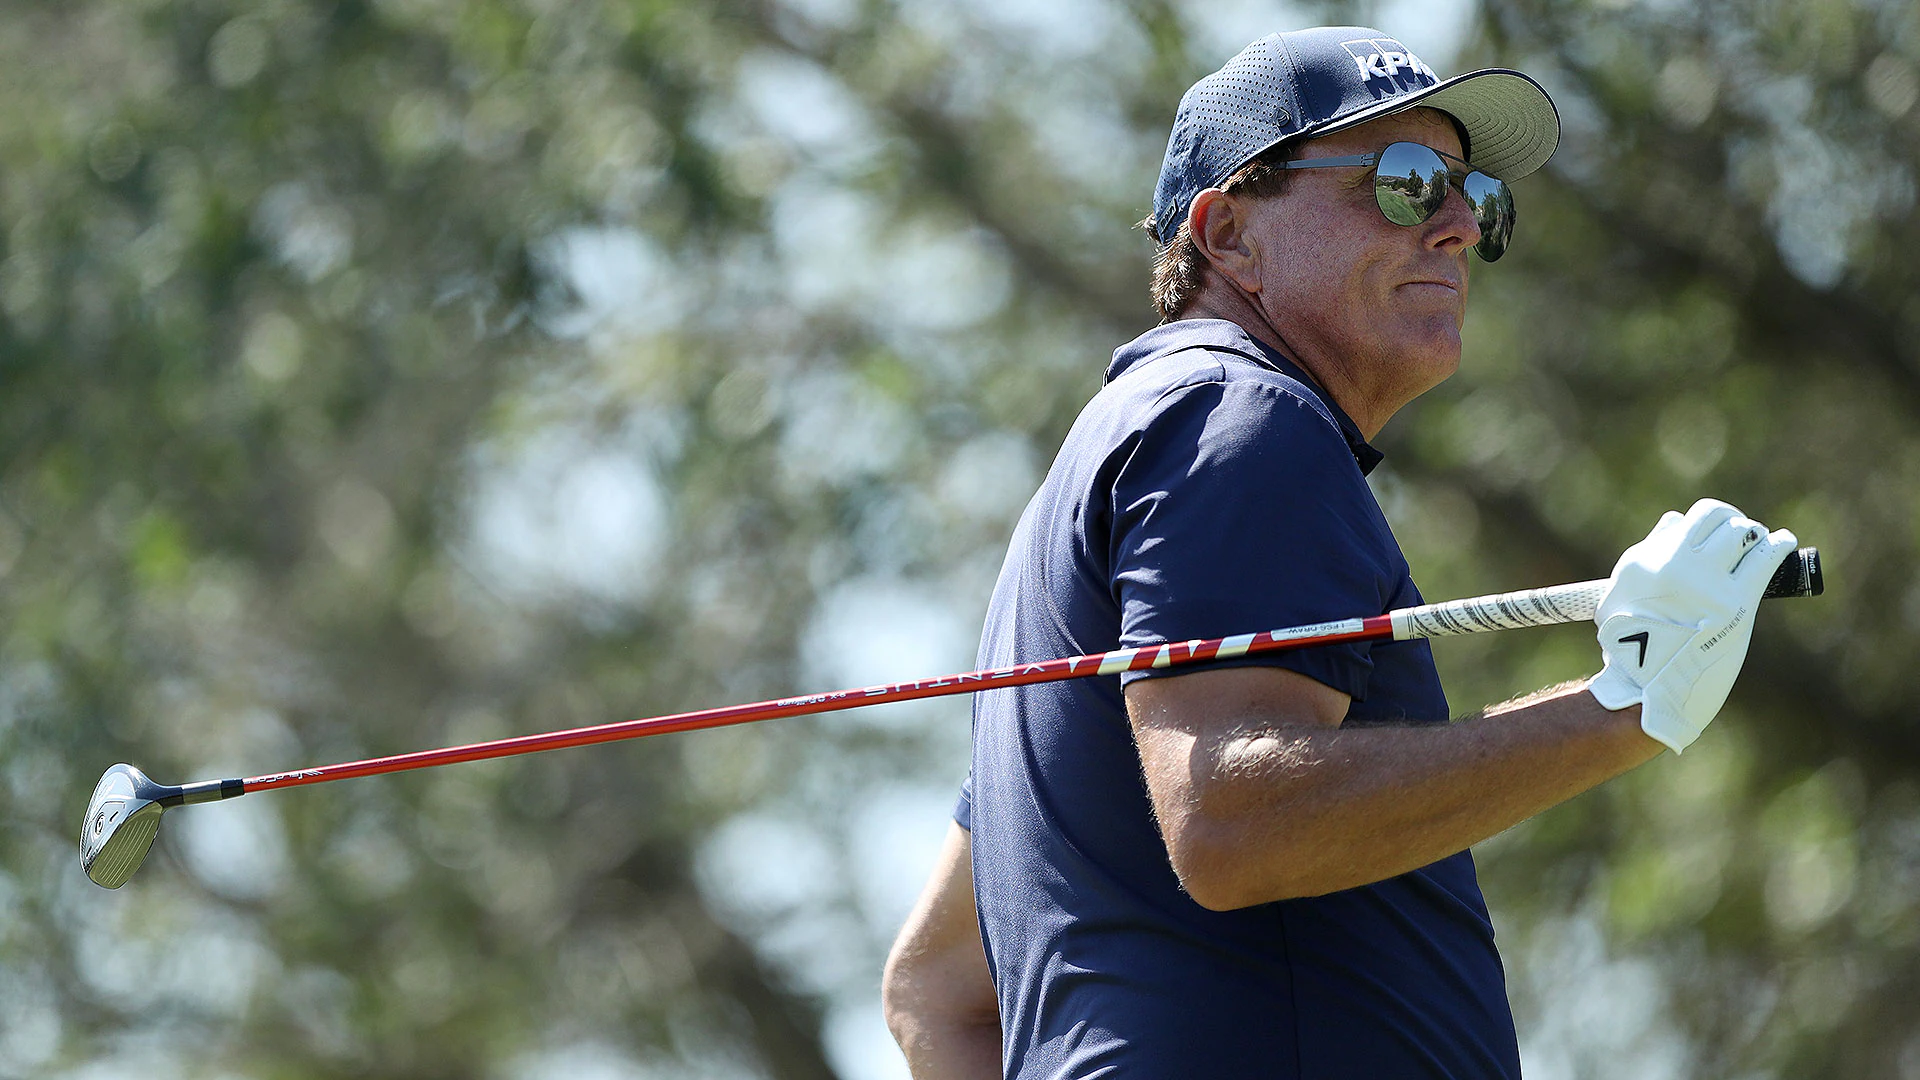 Phil Mickelson’s cracked 2-wood leads to ‘crazy shots’ at Fortinet Championship